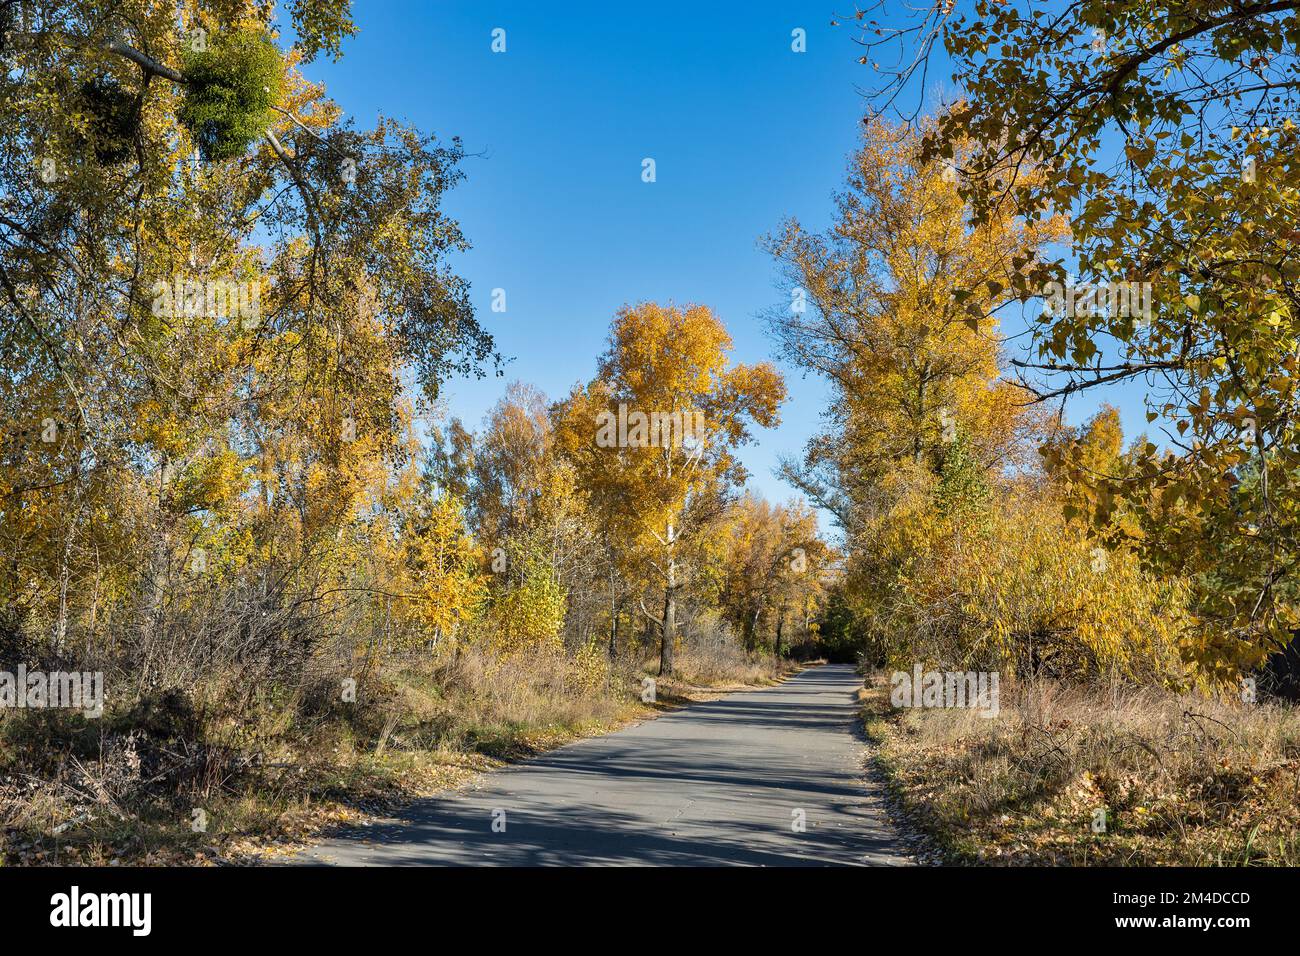 Landscape with empty asphalt road going into the autumn forest Stock Photo